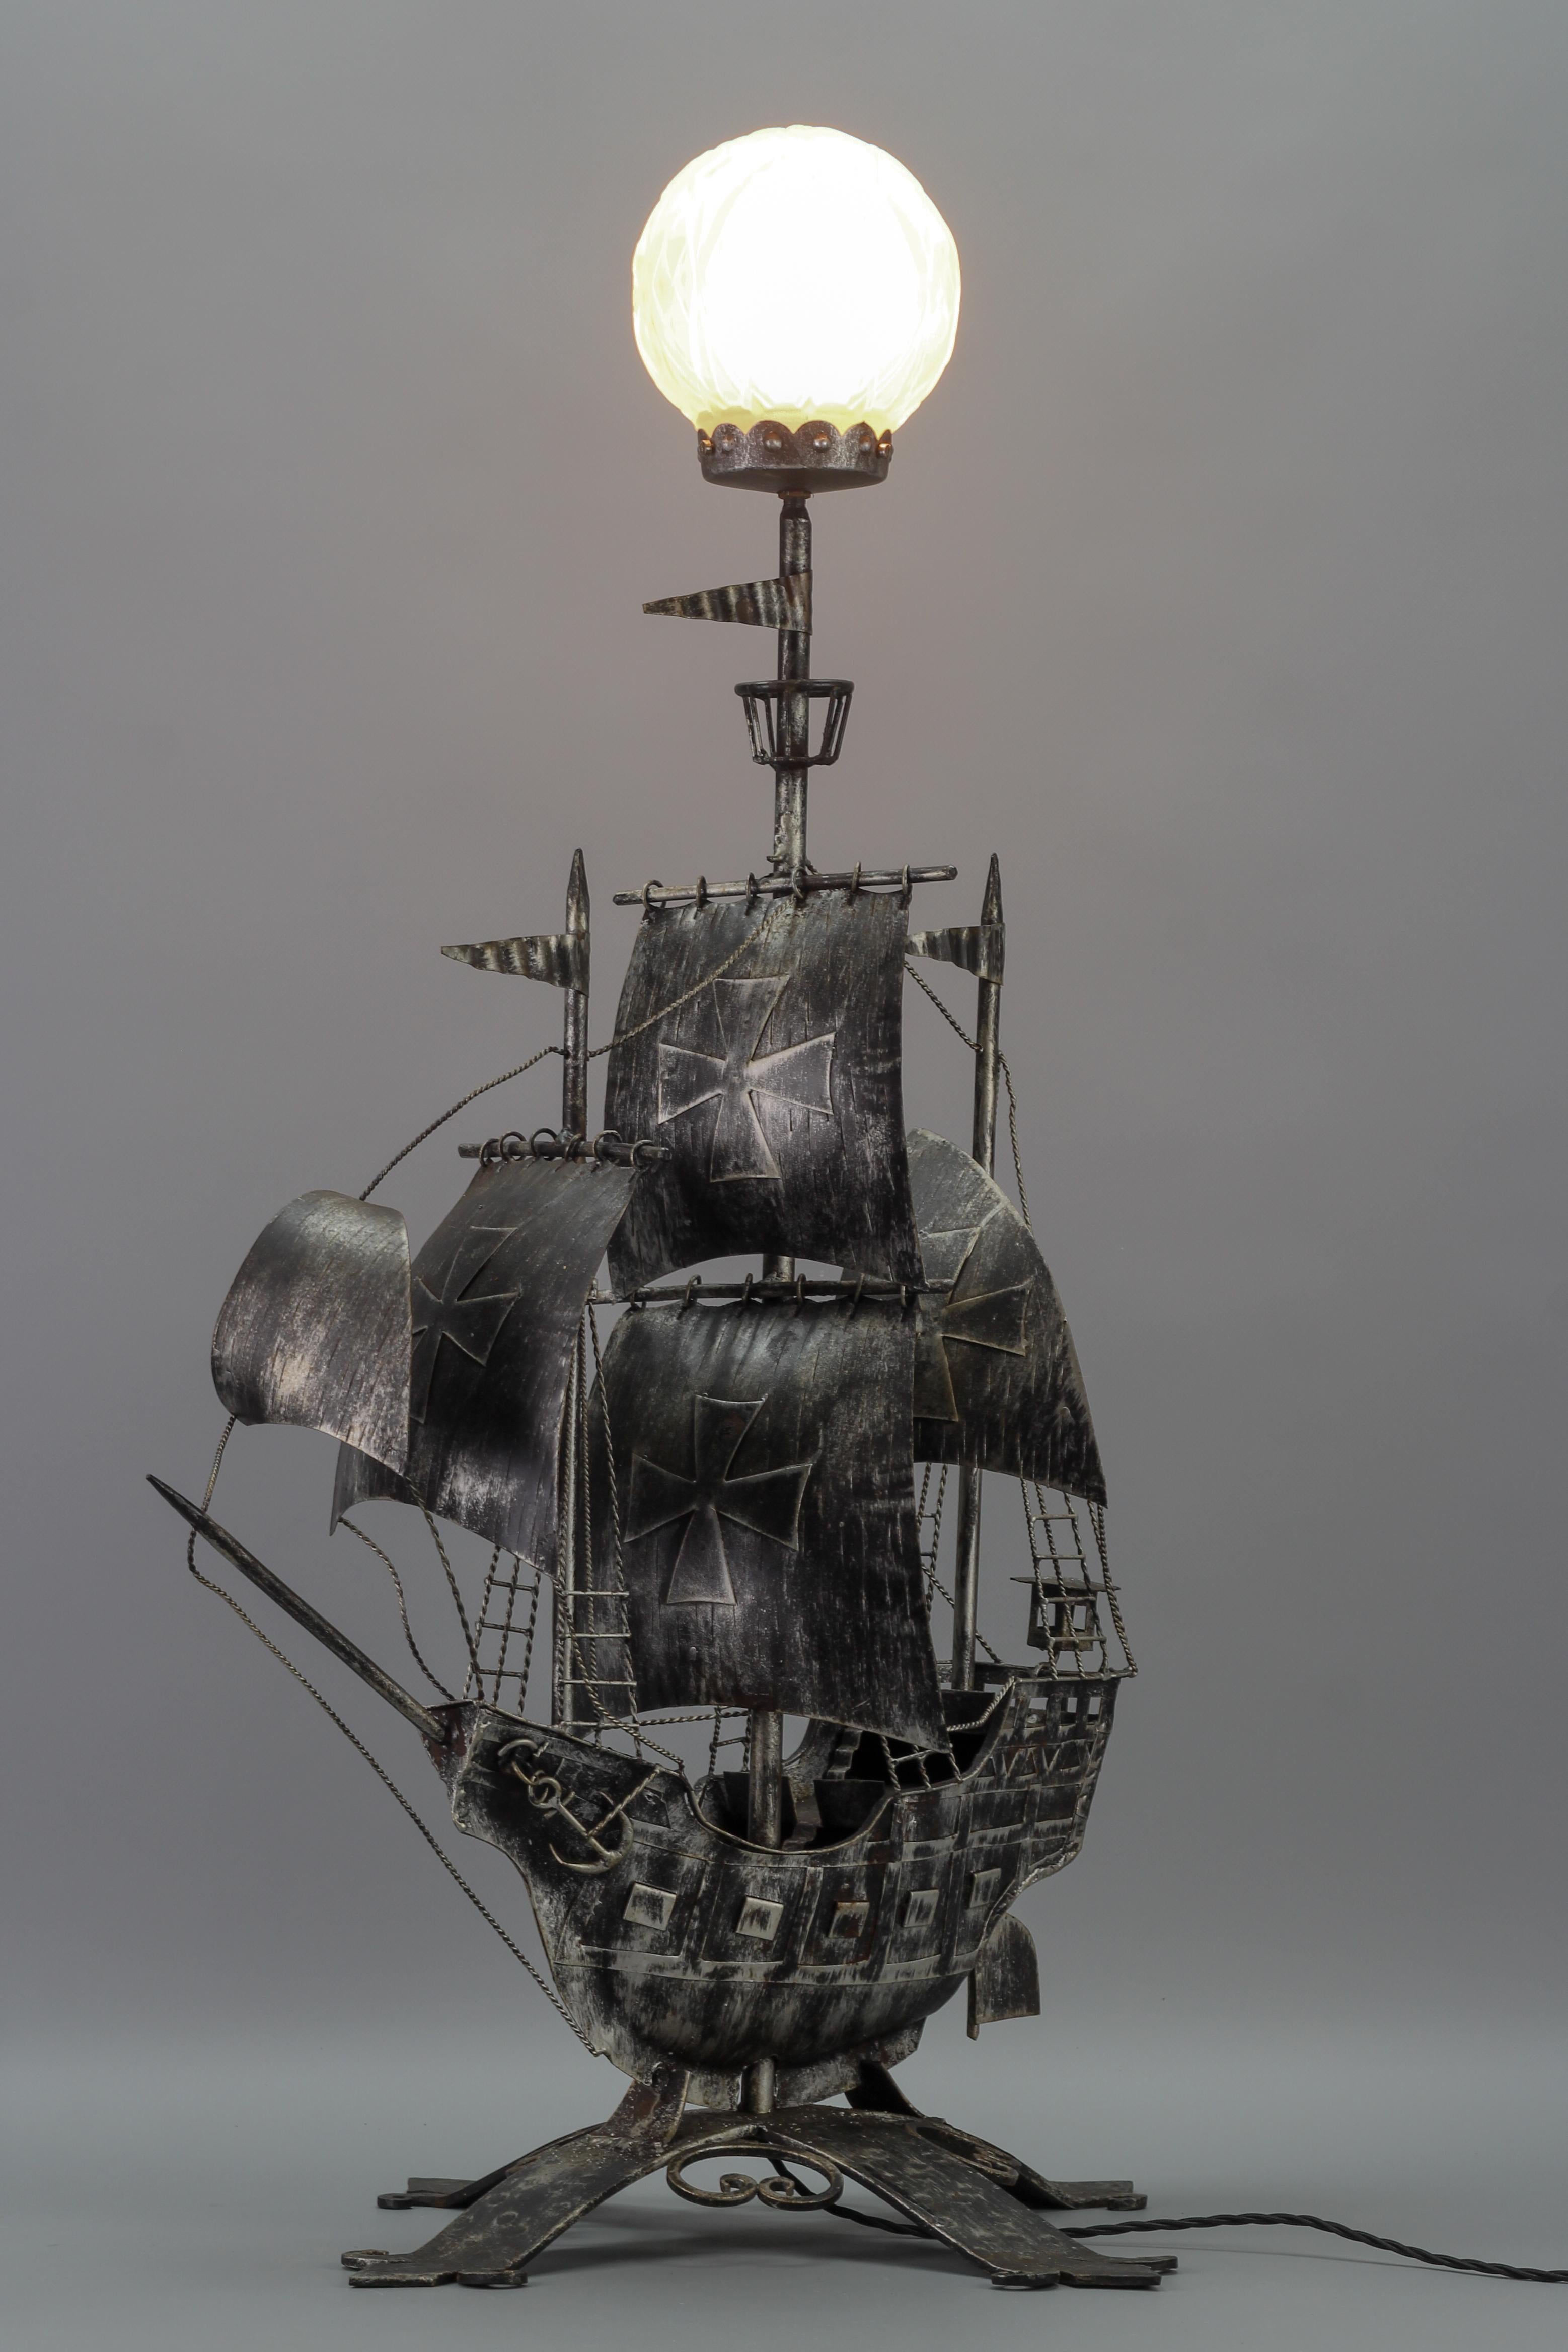 Wrought Iron and Glass Spanish Galleon Sailing Ship Shaped Floor Lamp, 1950s For Sale 13